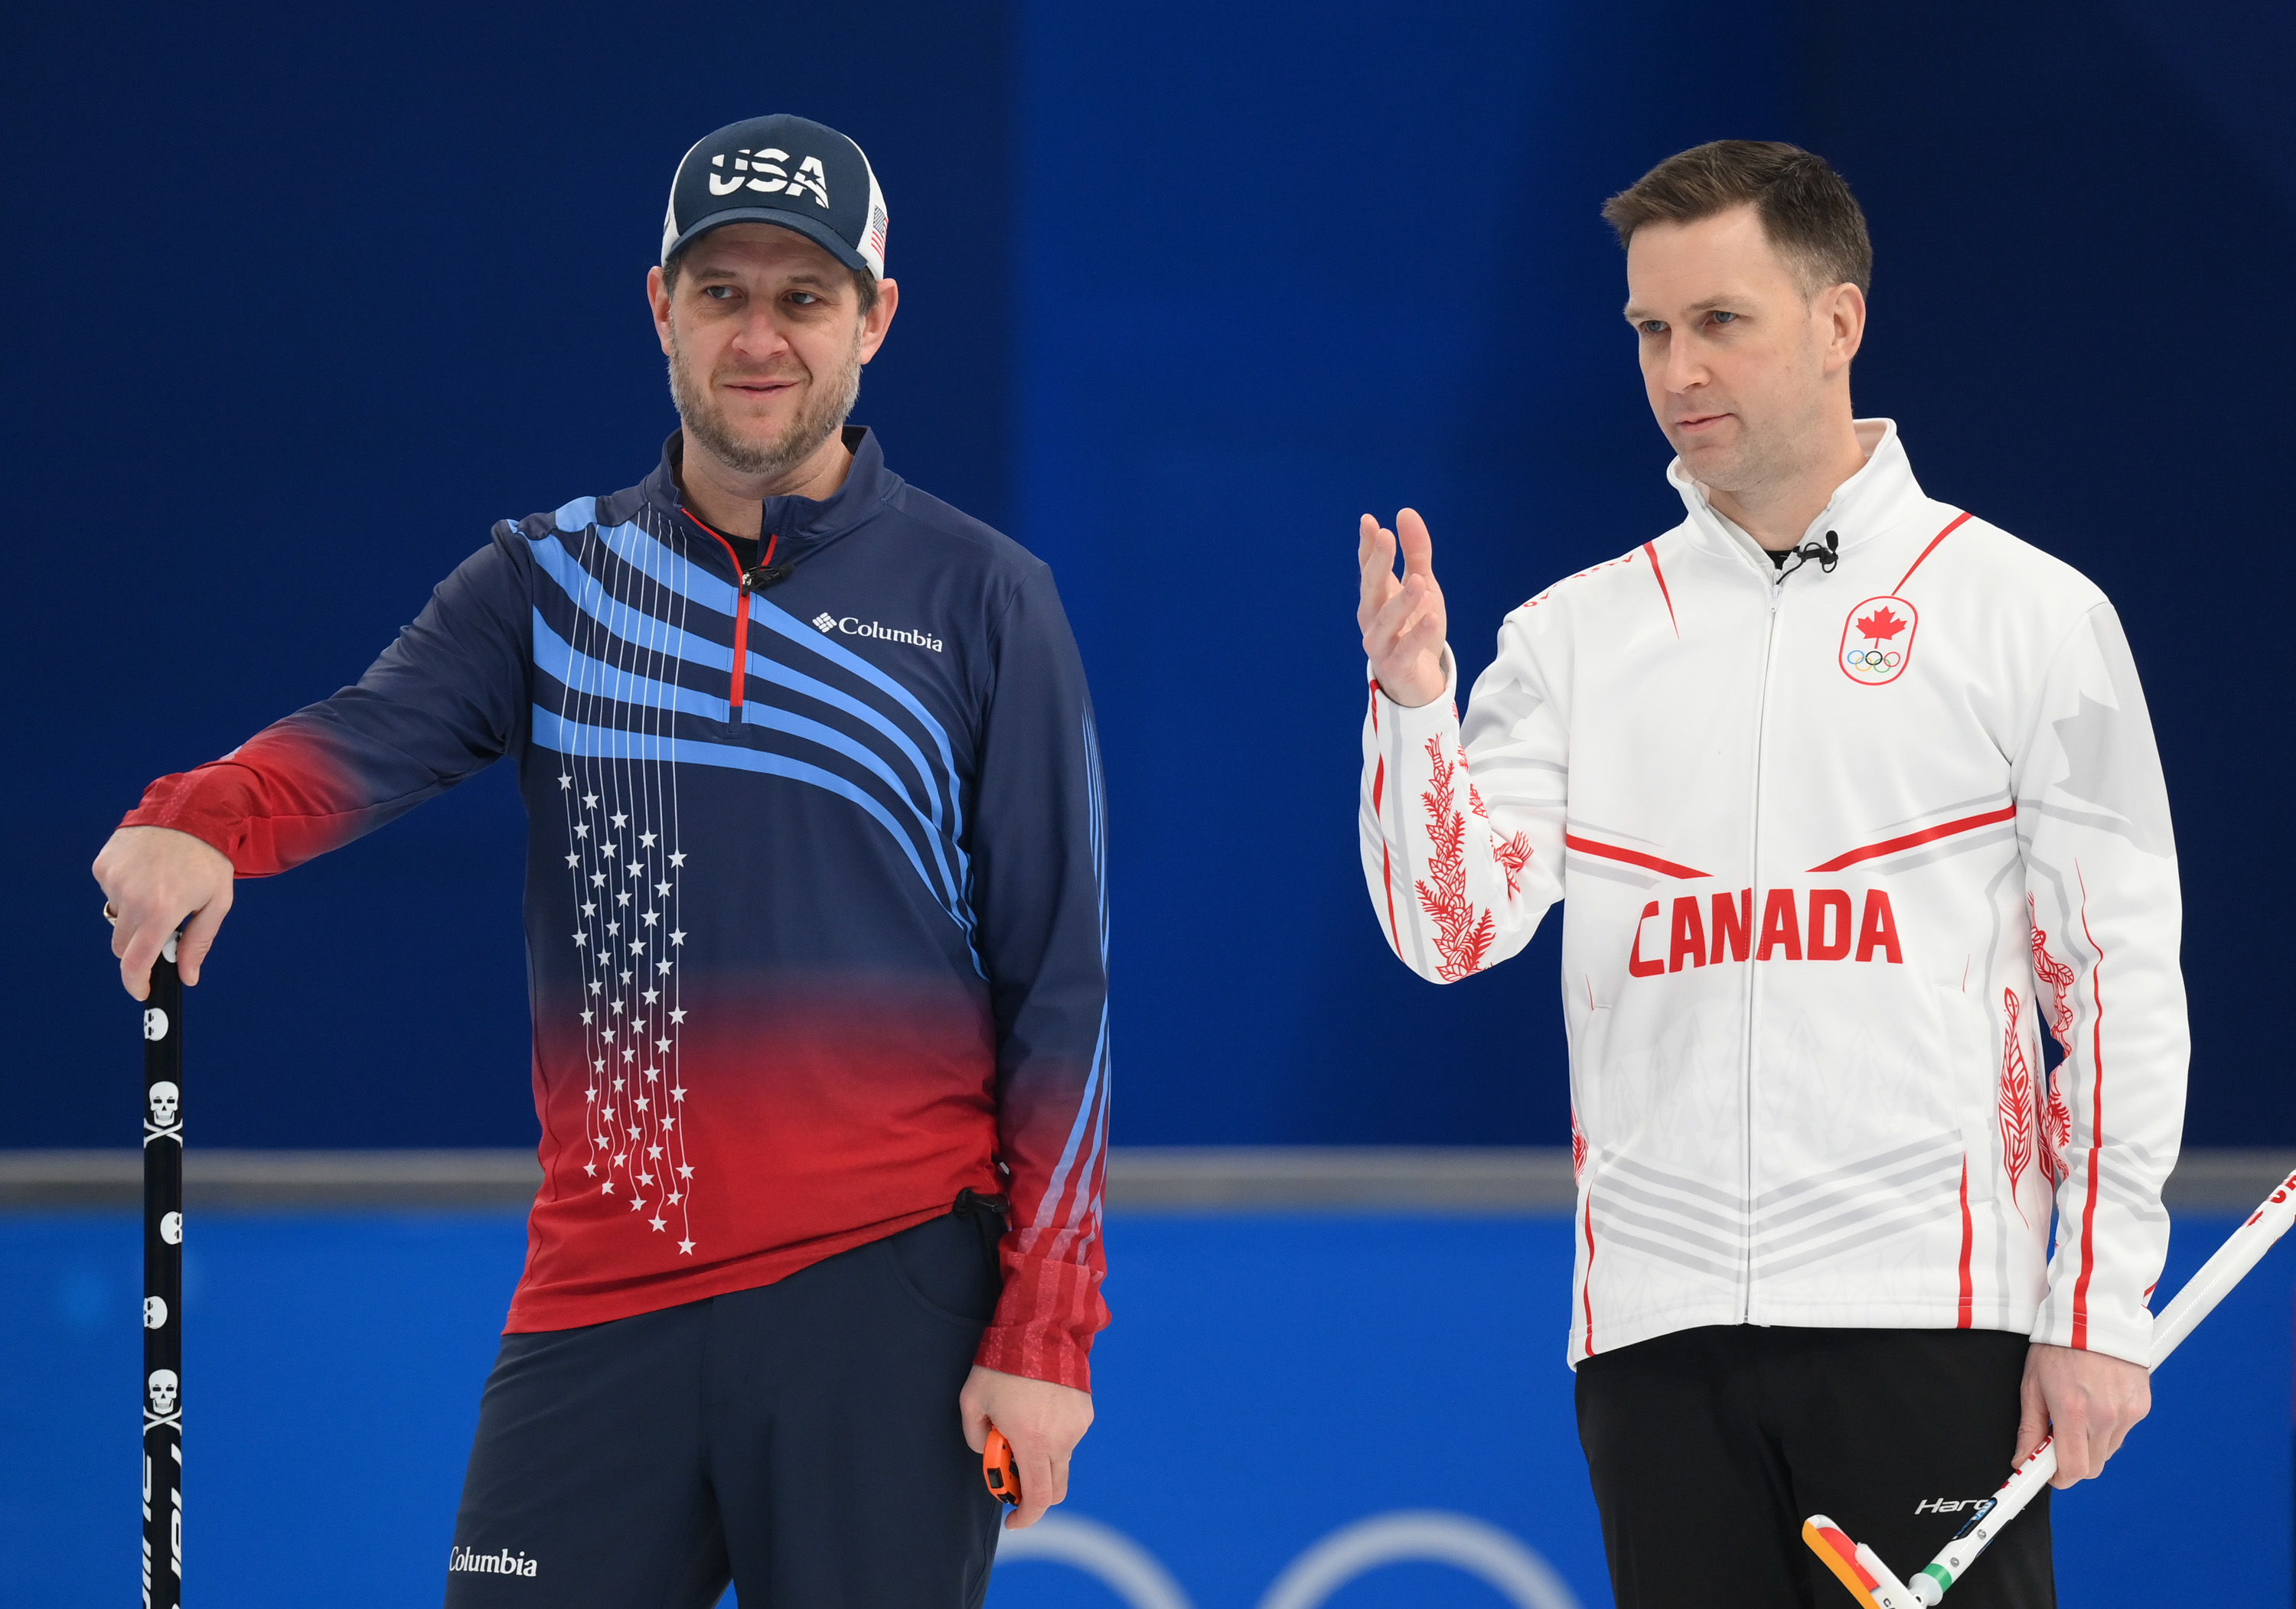 Team Usa Concedes To Canada With A Score Of 10 5 In Men S Curling Nbc Bay Area